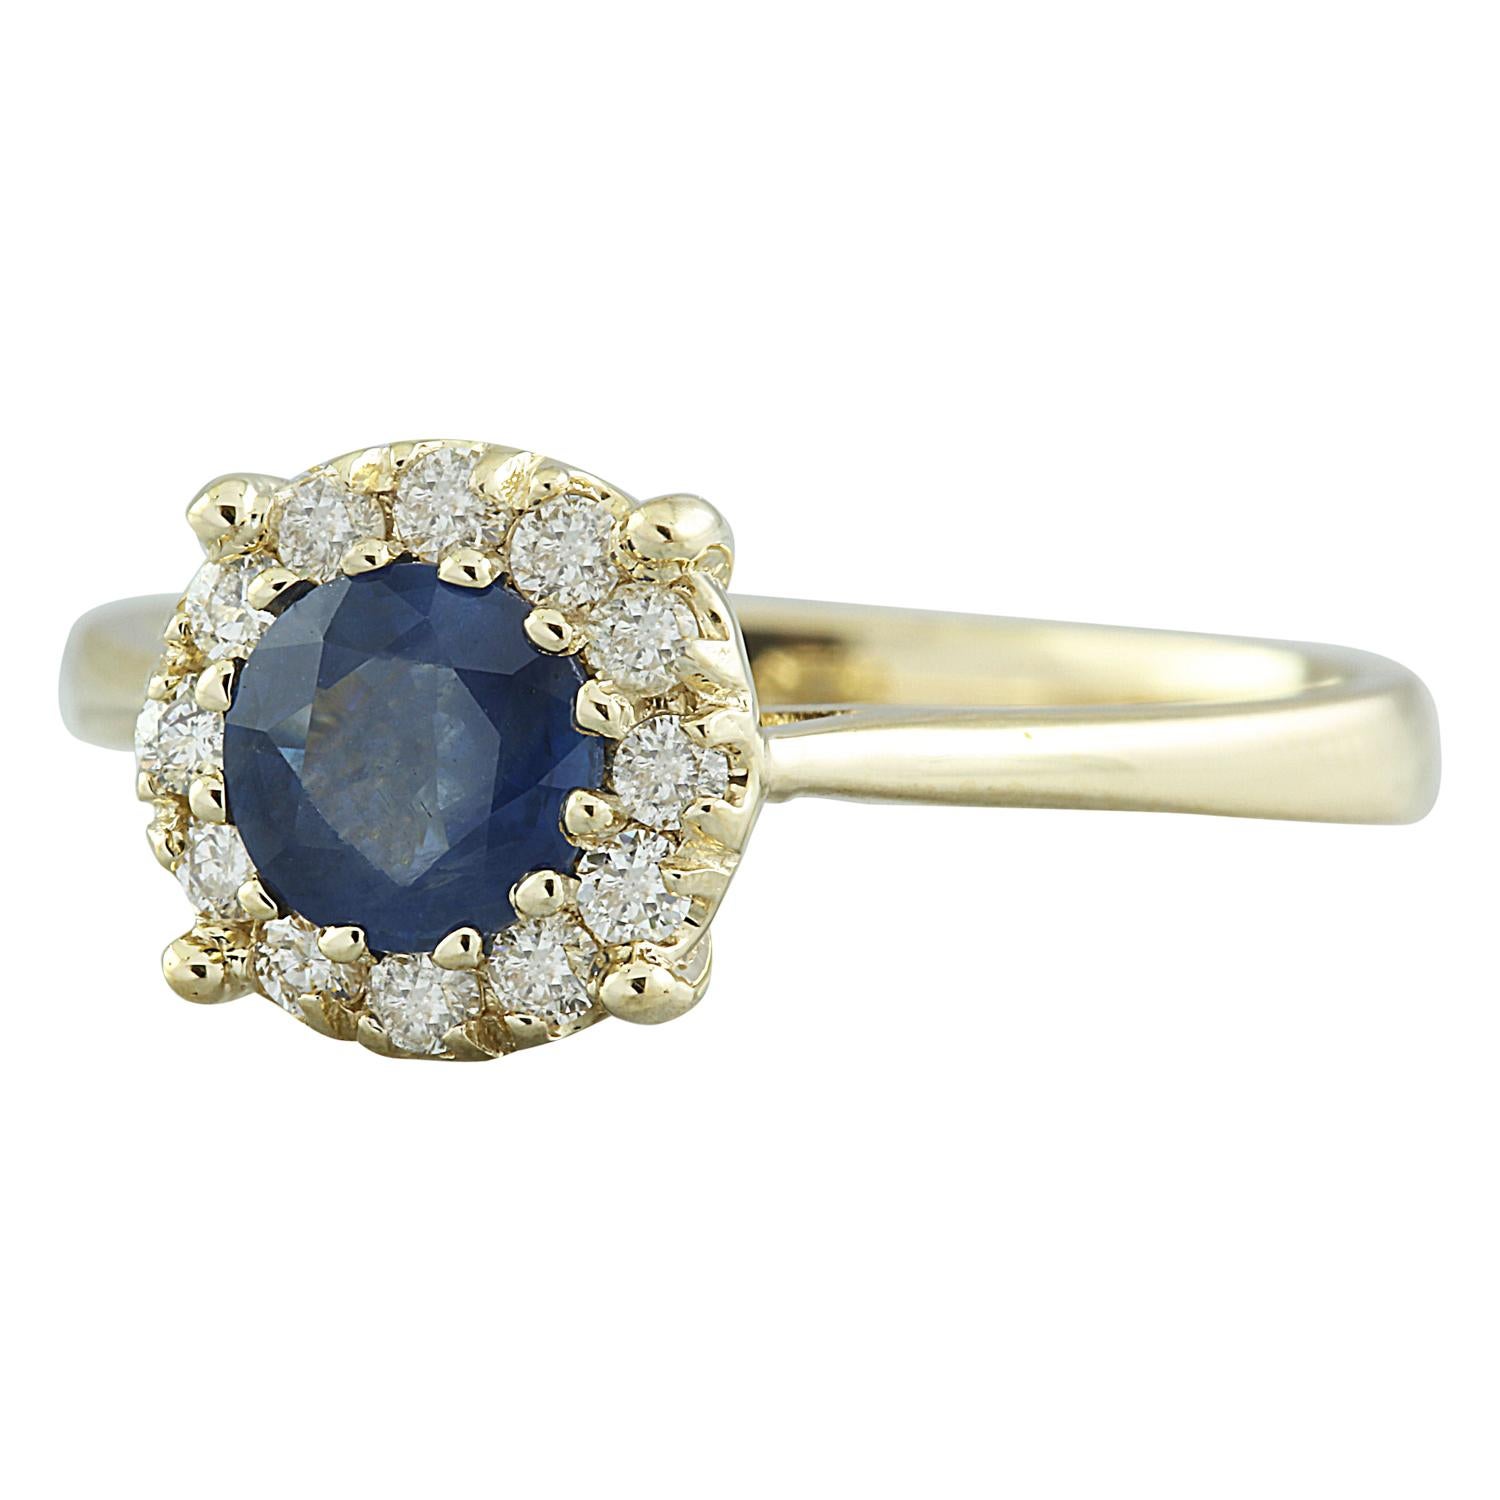 0.72 Carat Natural Sapphire 14 Karat Solid Yellow Gold Diamond Ring
Stamped: 14K 
Total Ring Weight: 2.9 Grams 
Sapphire Weight: 0.50 Carat (5.50x5.50 Millimeters)  
Diamond Weight: 0.22 carat (F-G Color, VS2-SI1 Clarity)
Quantity: 12
Face Measures: